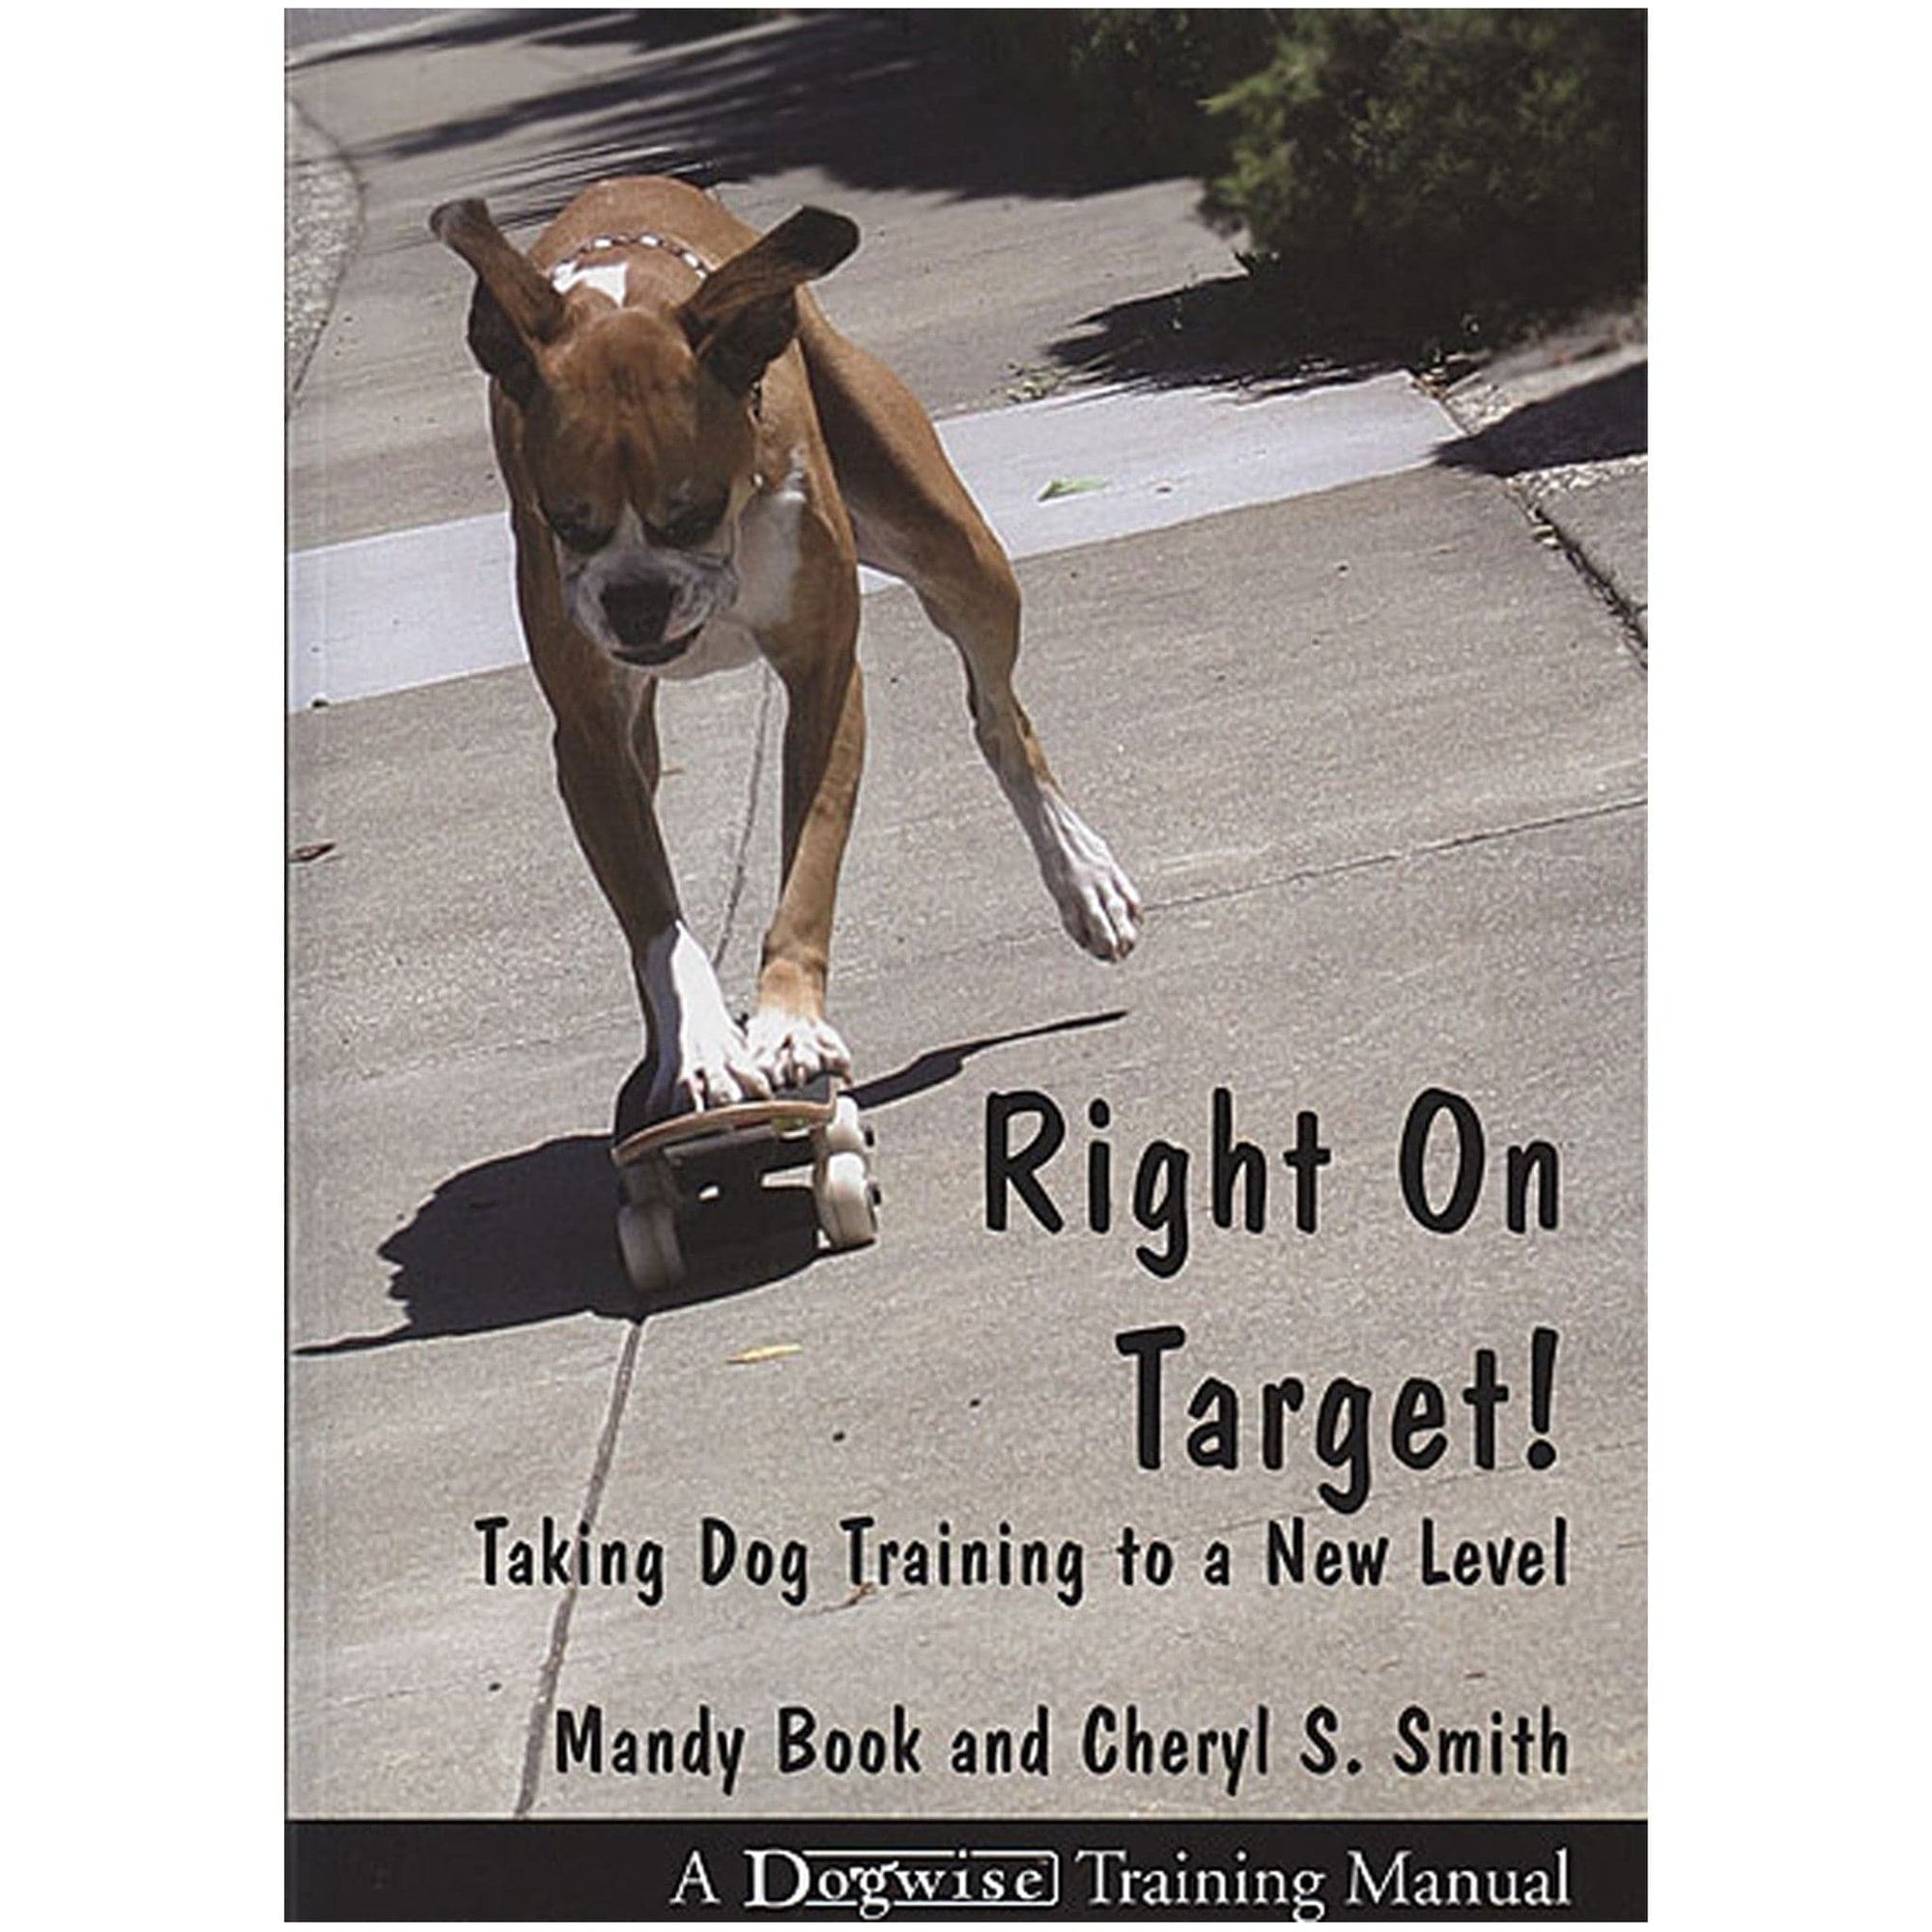 Right On Target! Taking Dog Training to a New Level   e-book